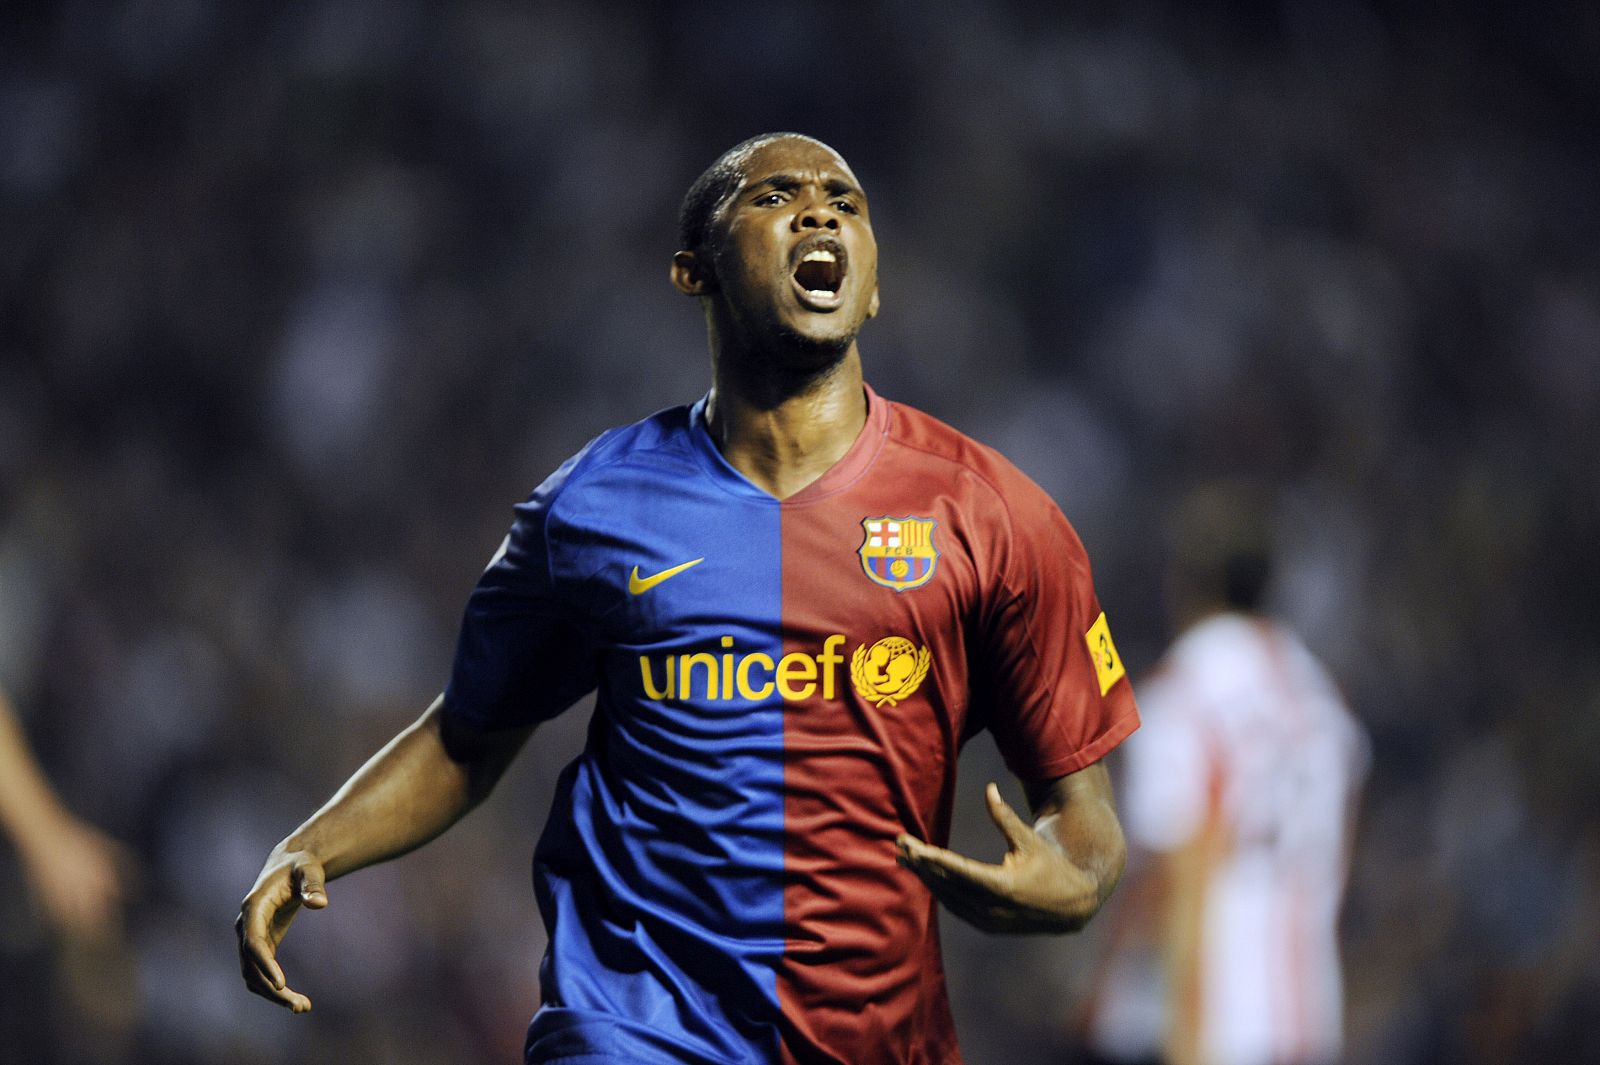 Barcelona's Samuel Etoo celebrates scoring against Athletic Bilbao during their Spanish First Division soccer match at San Mames stadium in Bilbao